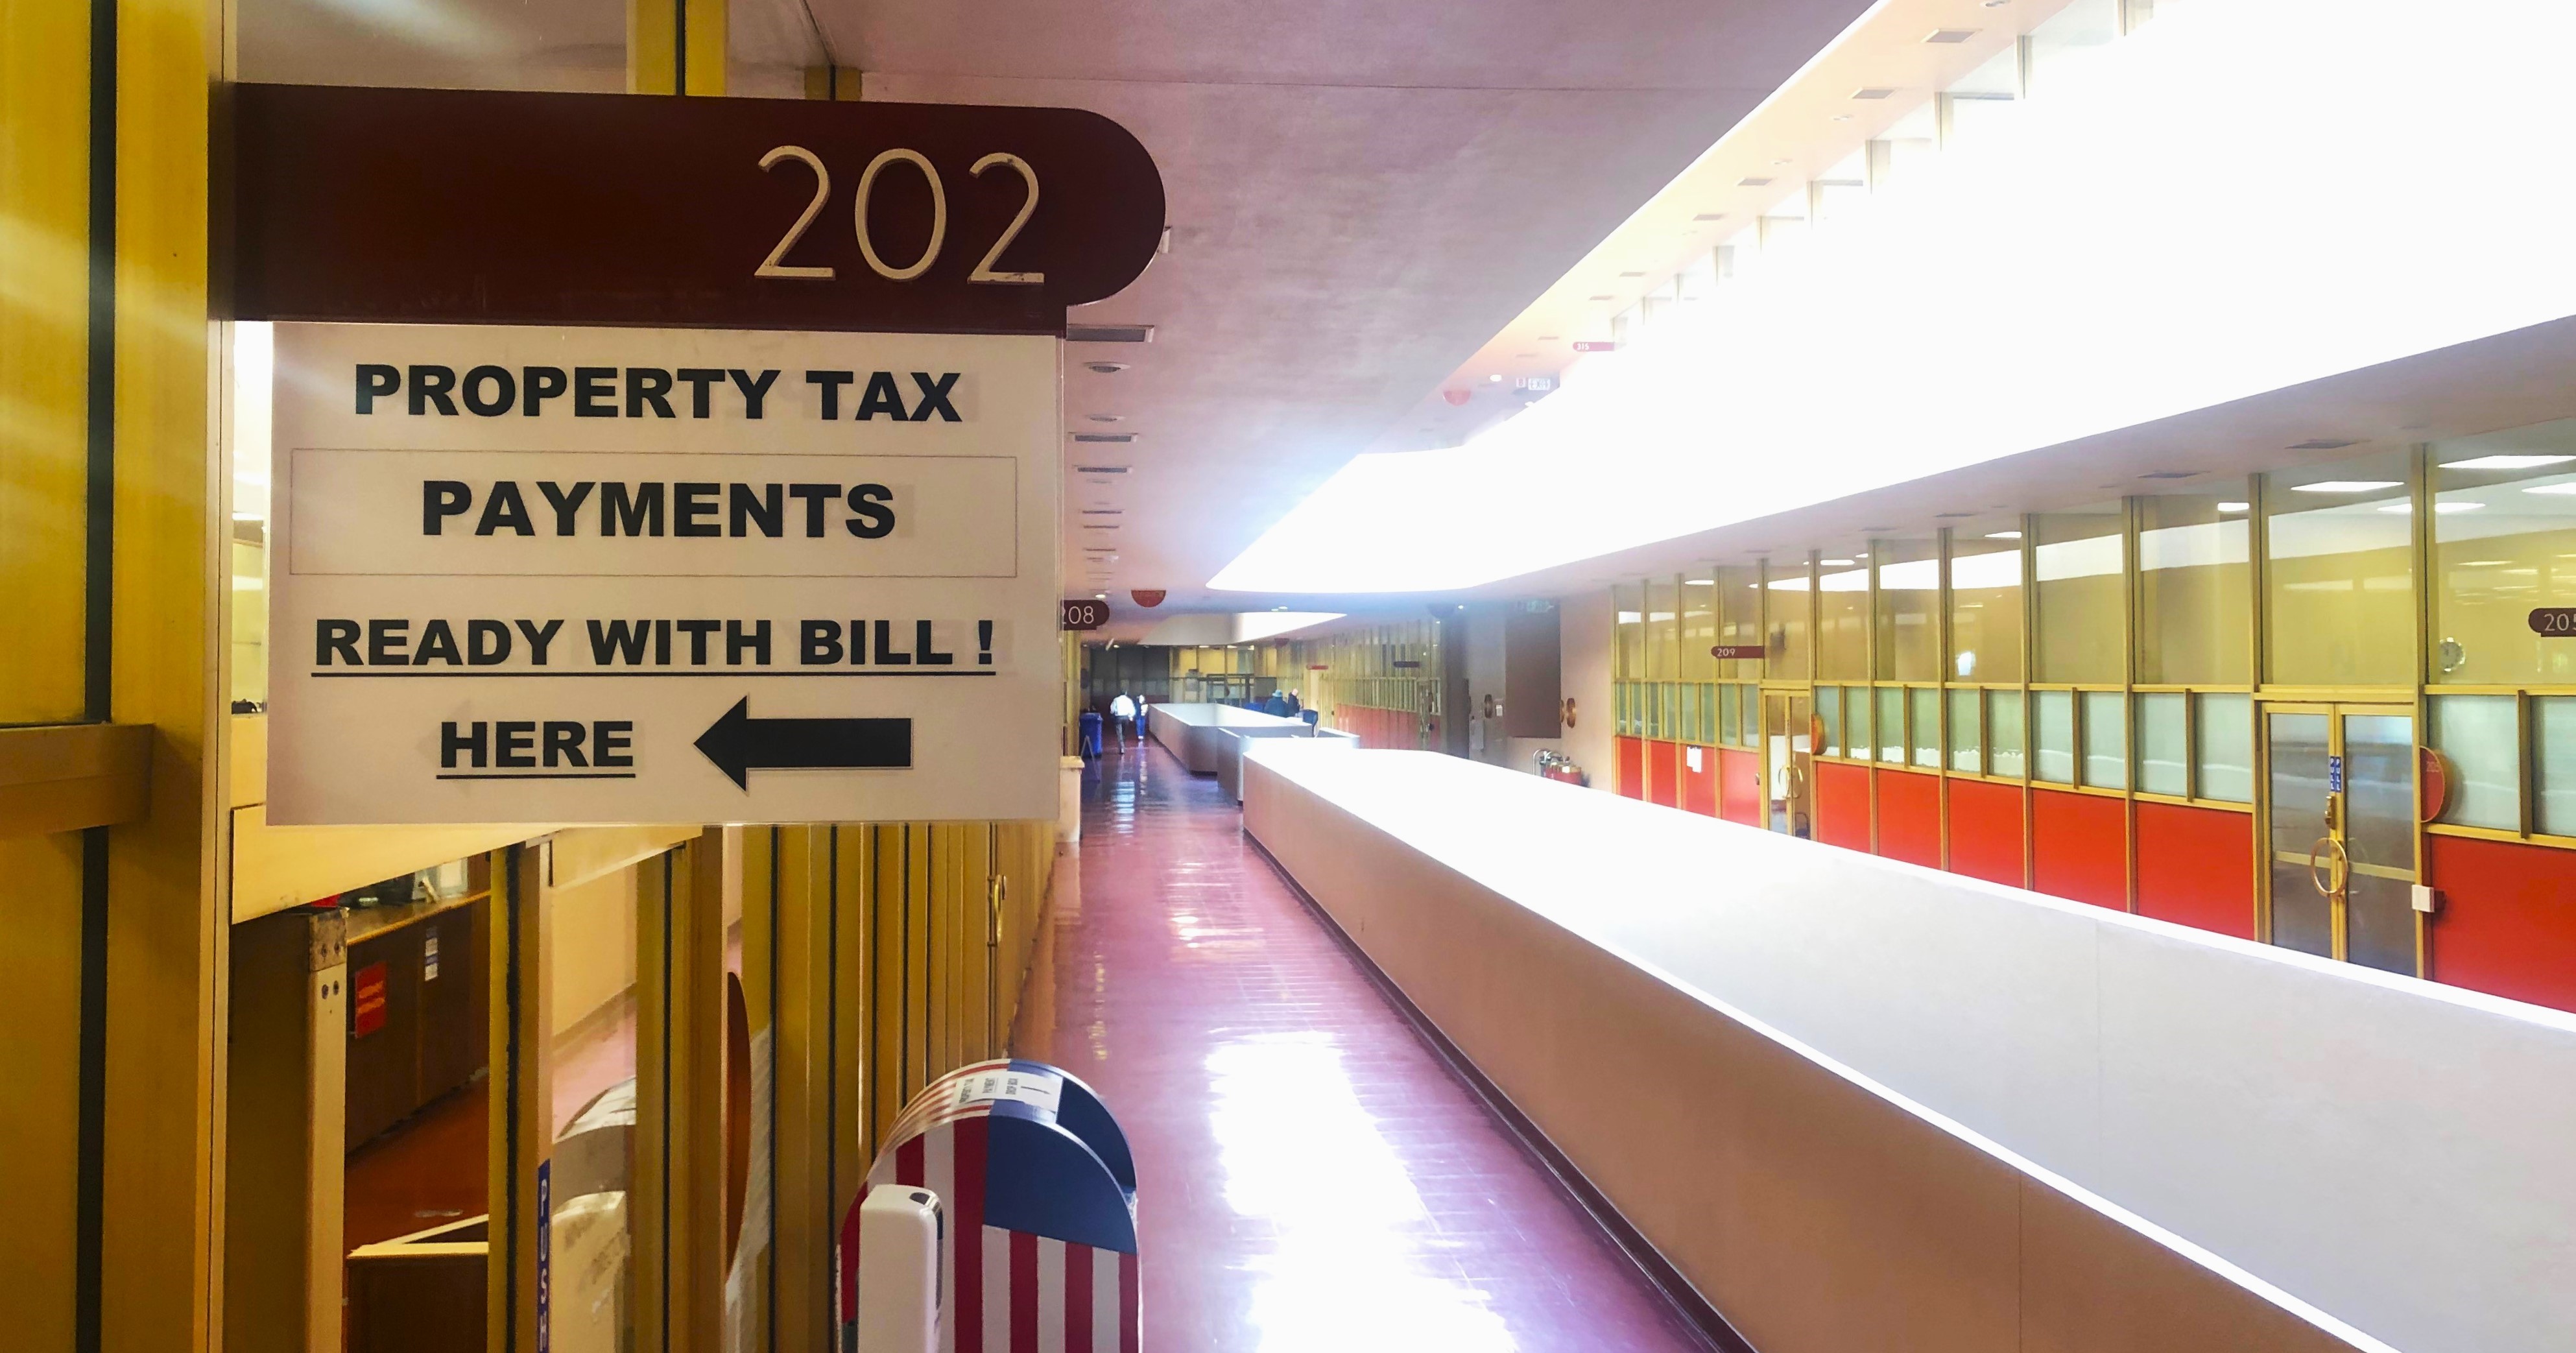 A closeup view of the sign at the Civic Center that says Room 202, Property Tax Payments.